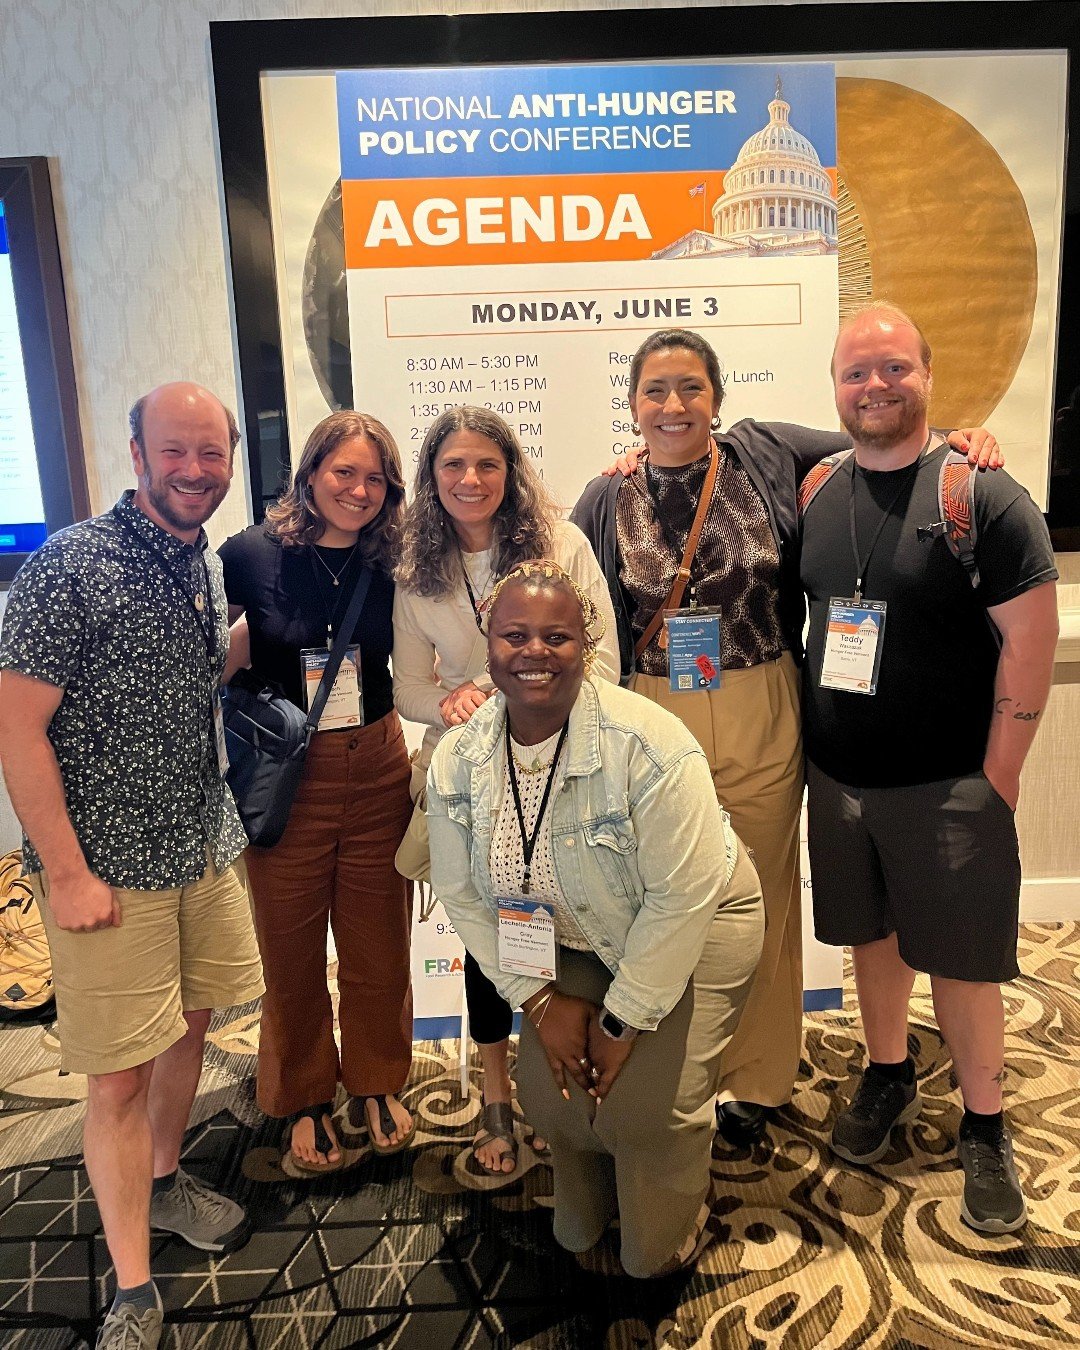 📢 Update from DC: Hunger Free Vermont staff are attending the Anti-Hunger Policy Conference, connecting with advocates nationwide. 📢 

We&rsquo;re learning from state-level efforts, exploring community-based solutions, participating in vital discus